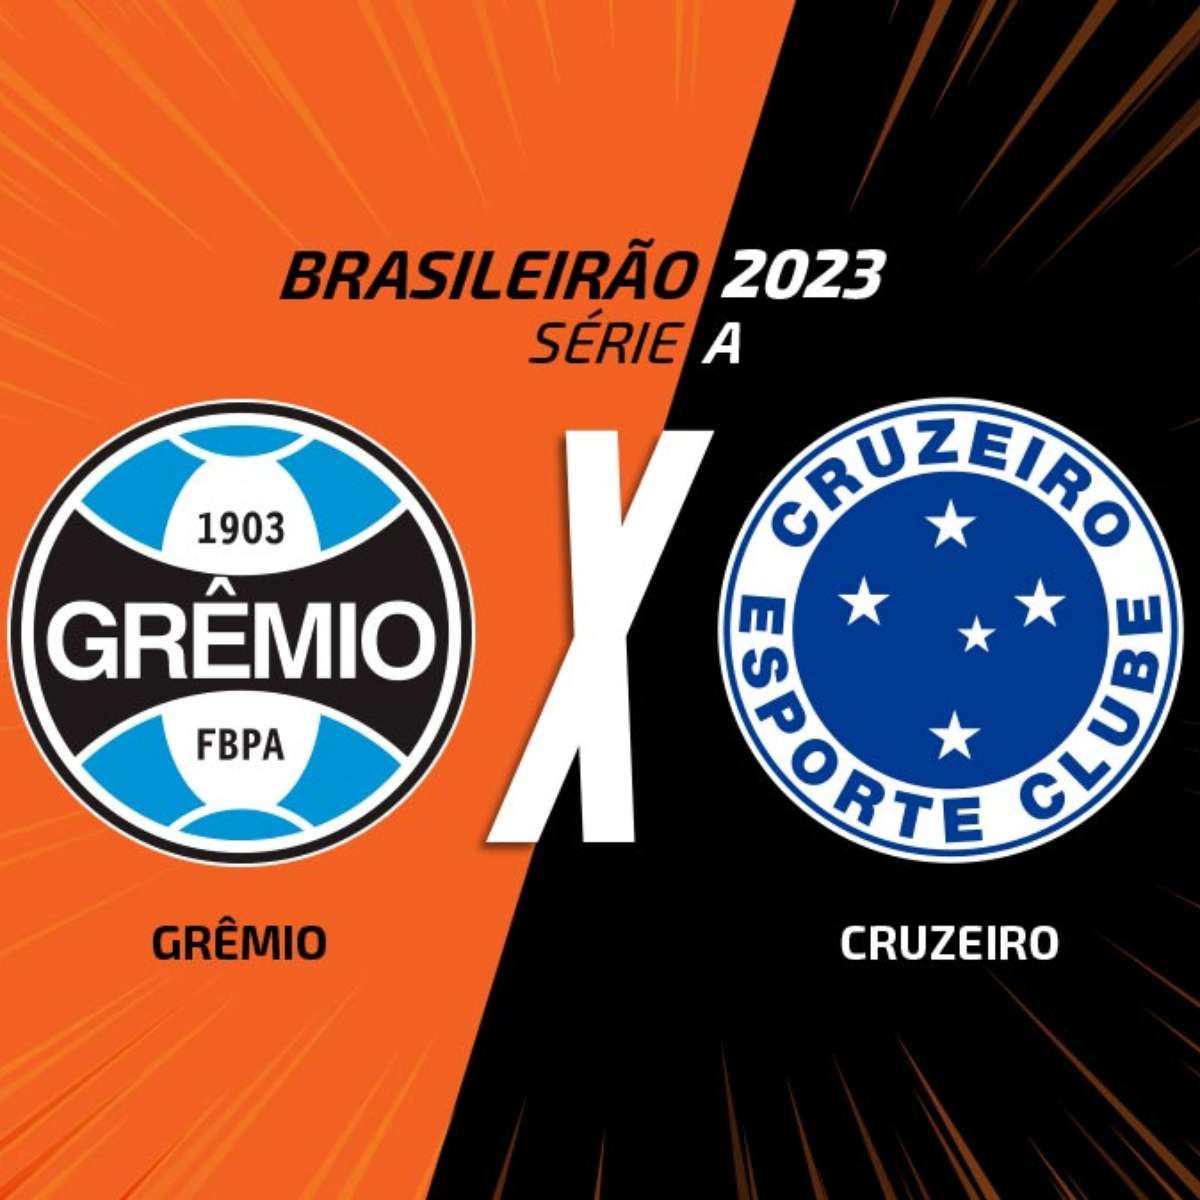 Gremio vs Brusque: An Exciting Clash Between Two Brazilian Football Clubs